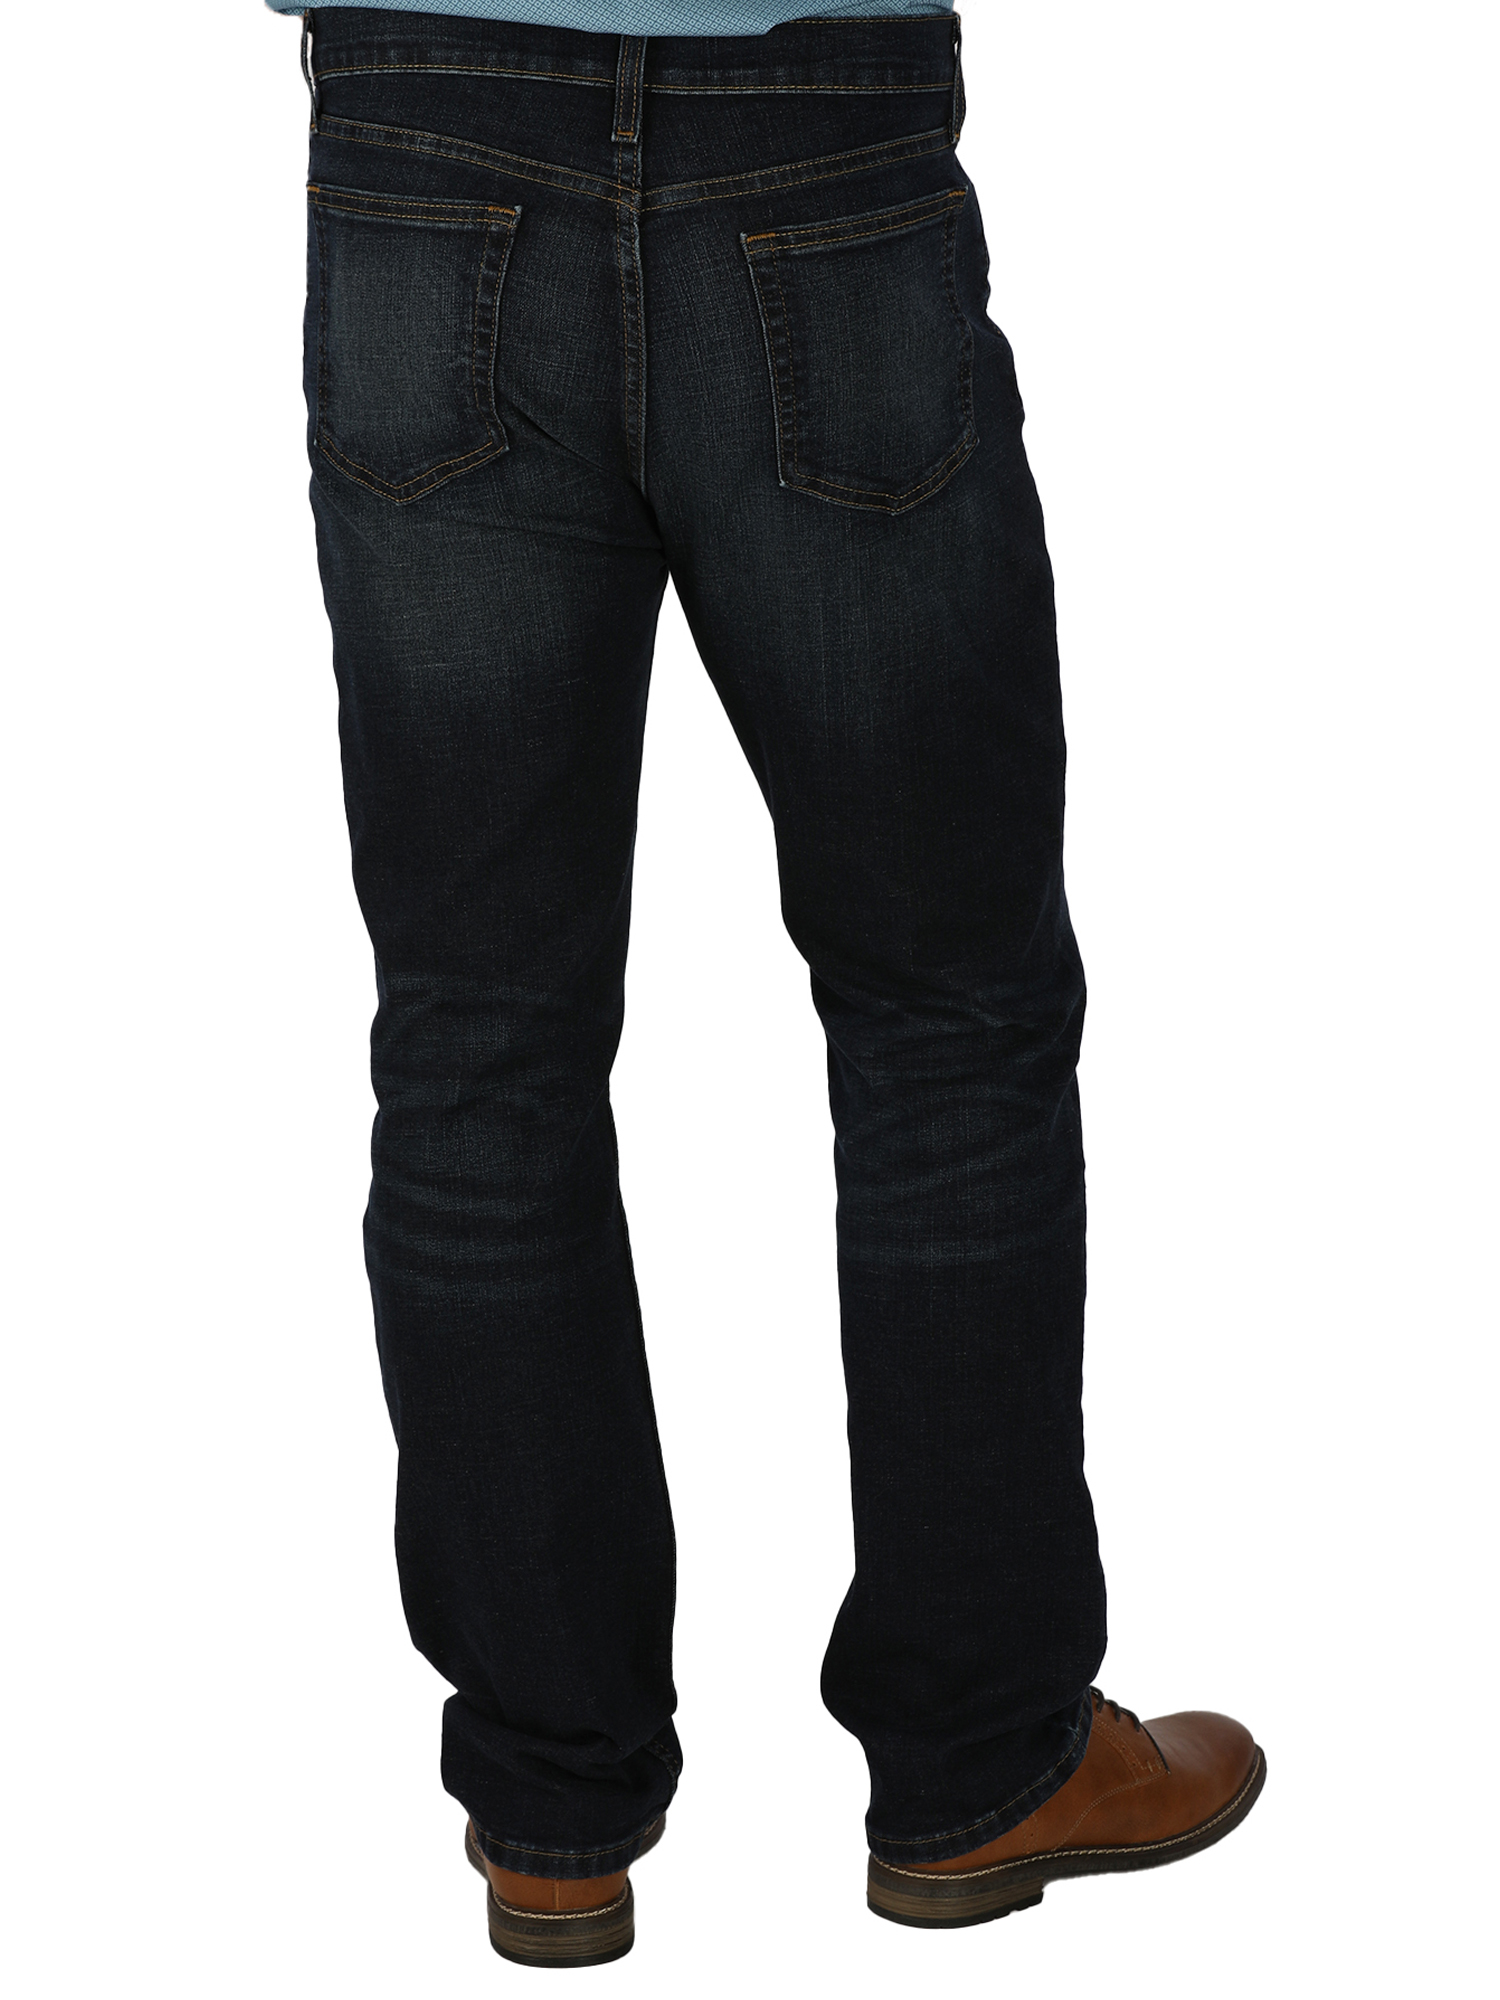 George Men's Straight Fit Jeans - image 5 of 5